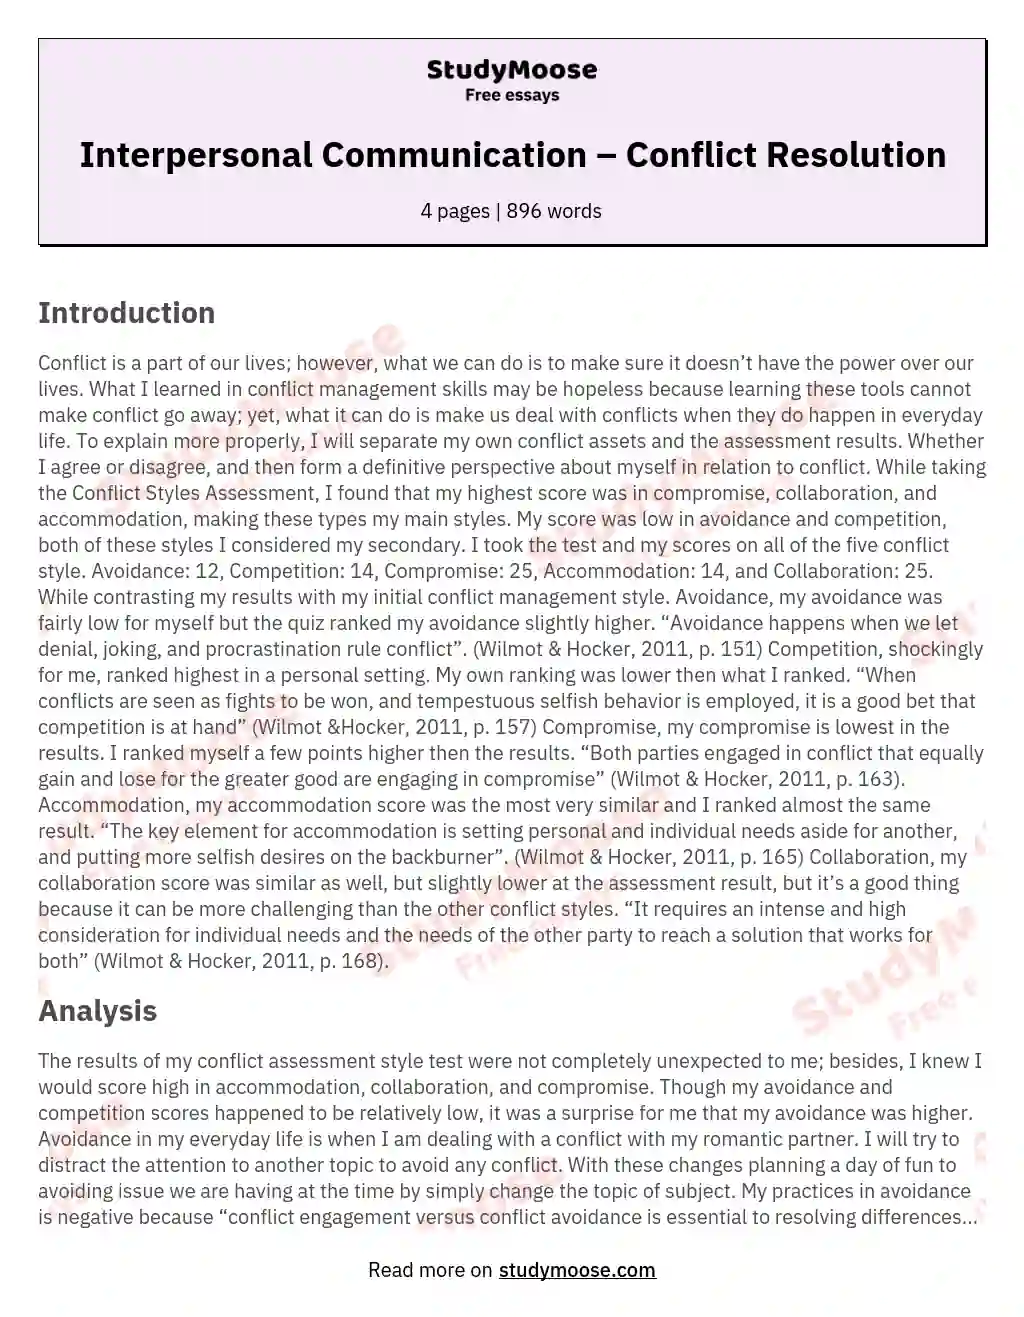 interpersonal communication conflict essay